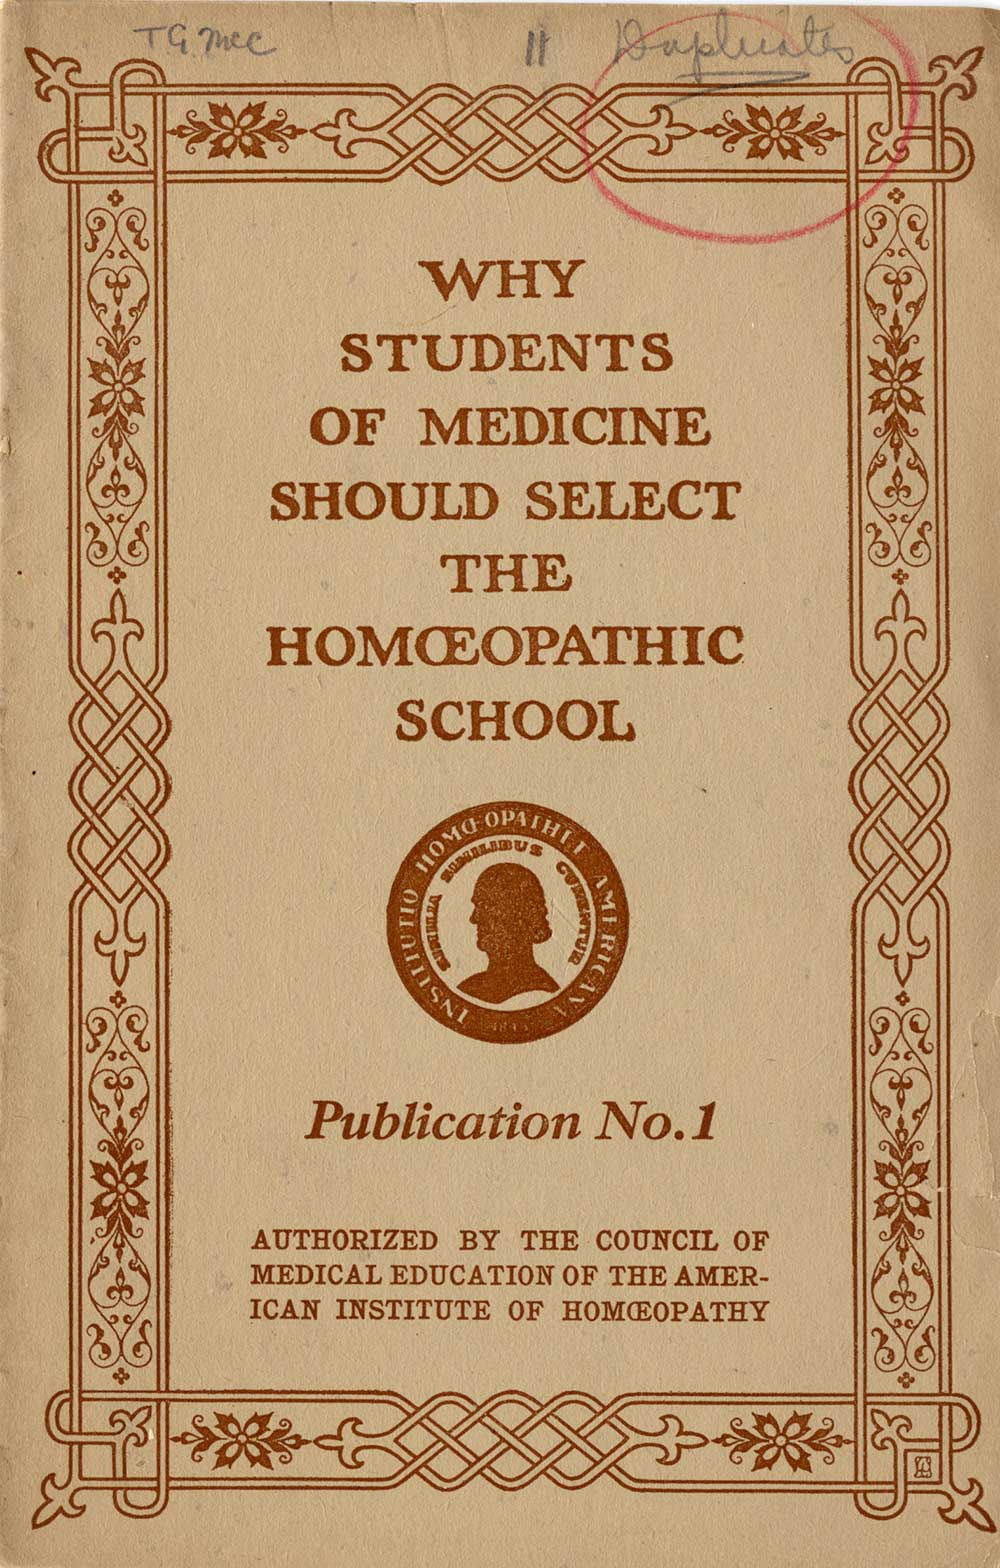 Homeopathy pamphlet